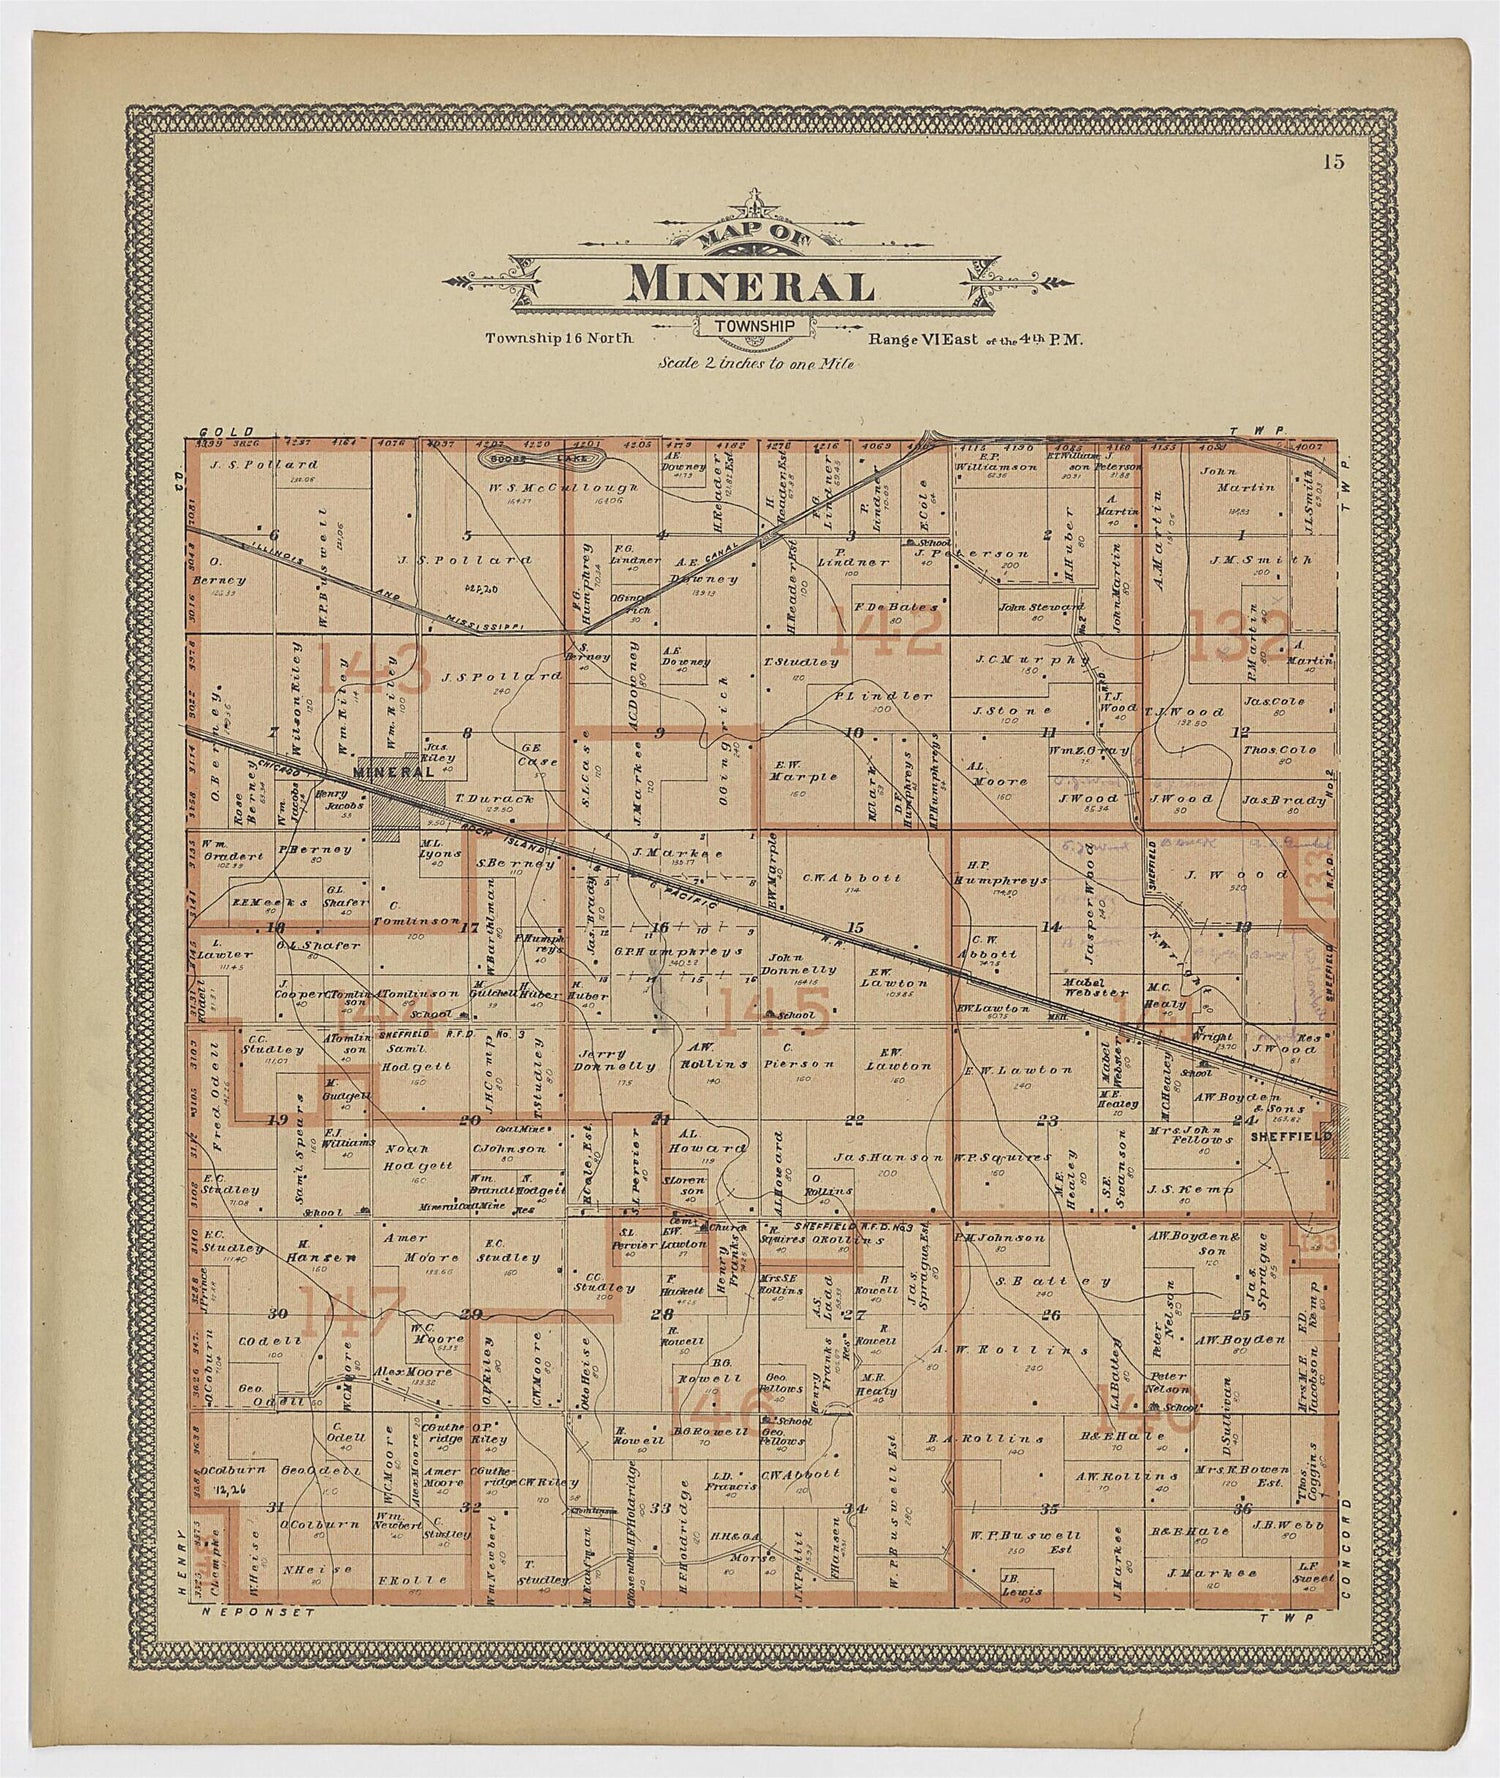 This old map of Image 9 of 20th Century Atlas of Bureau County, Illinois from Atlas of Bureau County, Illinois from 1905 was created by  Middle-West Publishing Co in 1905